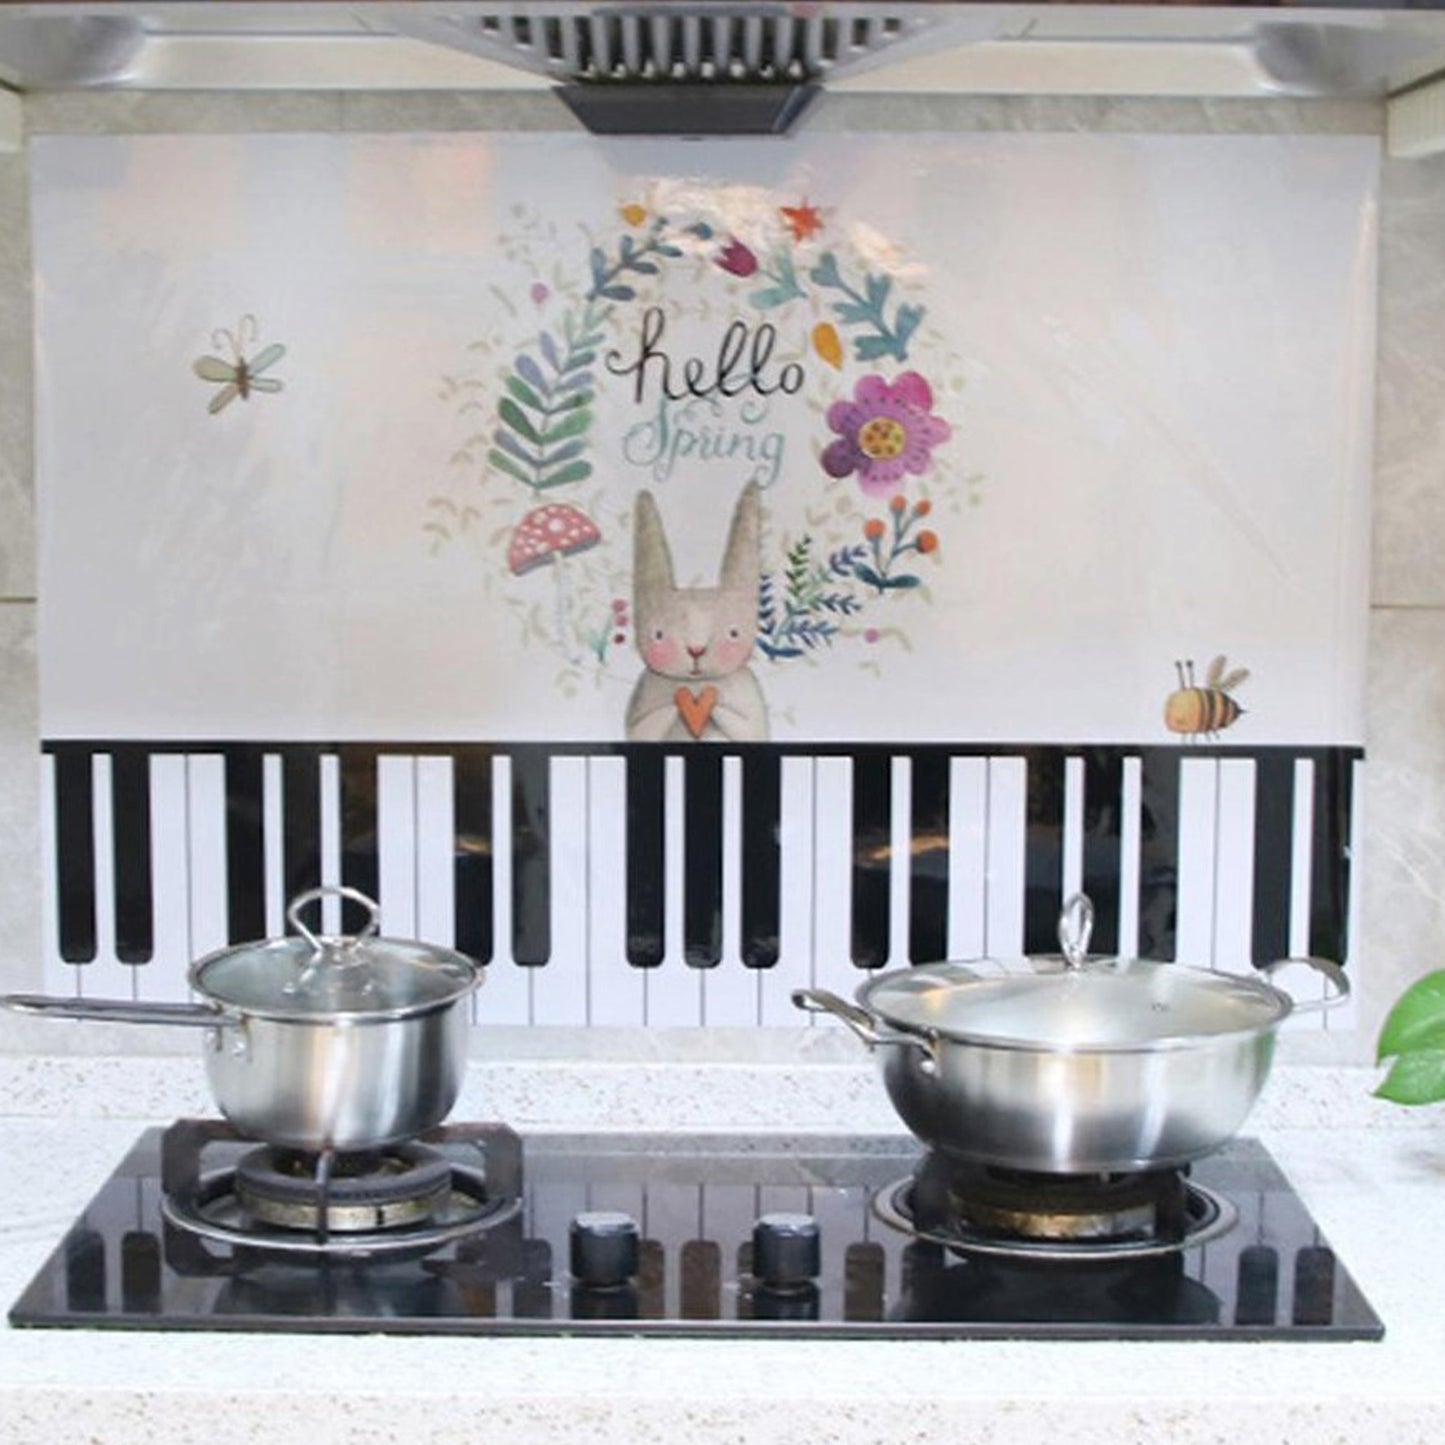 Kitchen Hood Anti Cooking Oil & Temperature Waterproof Sticker (Piano with Rabbit)